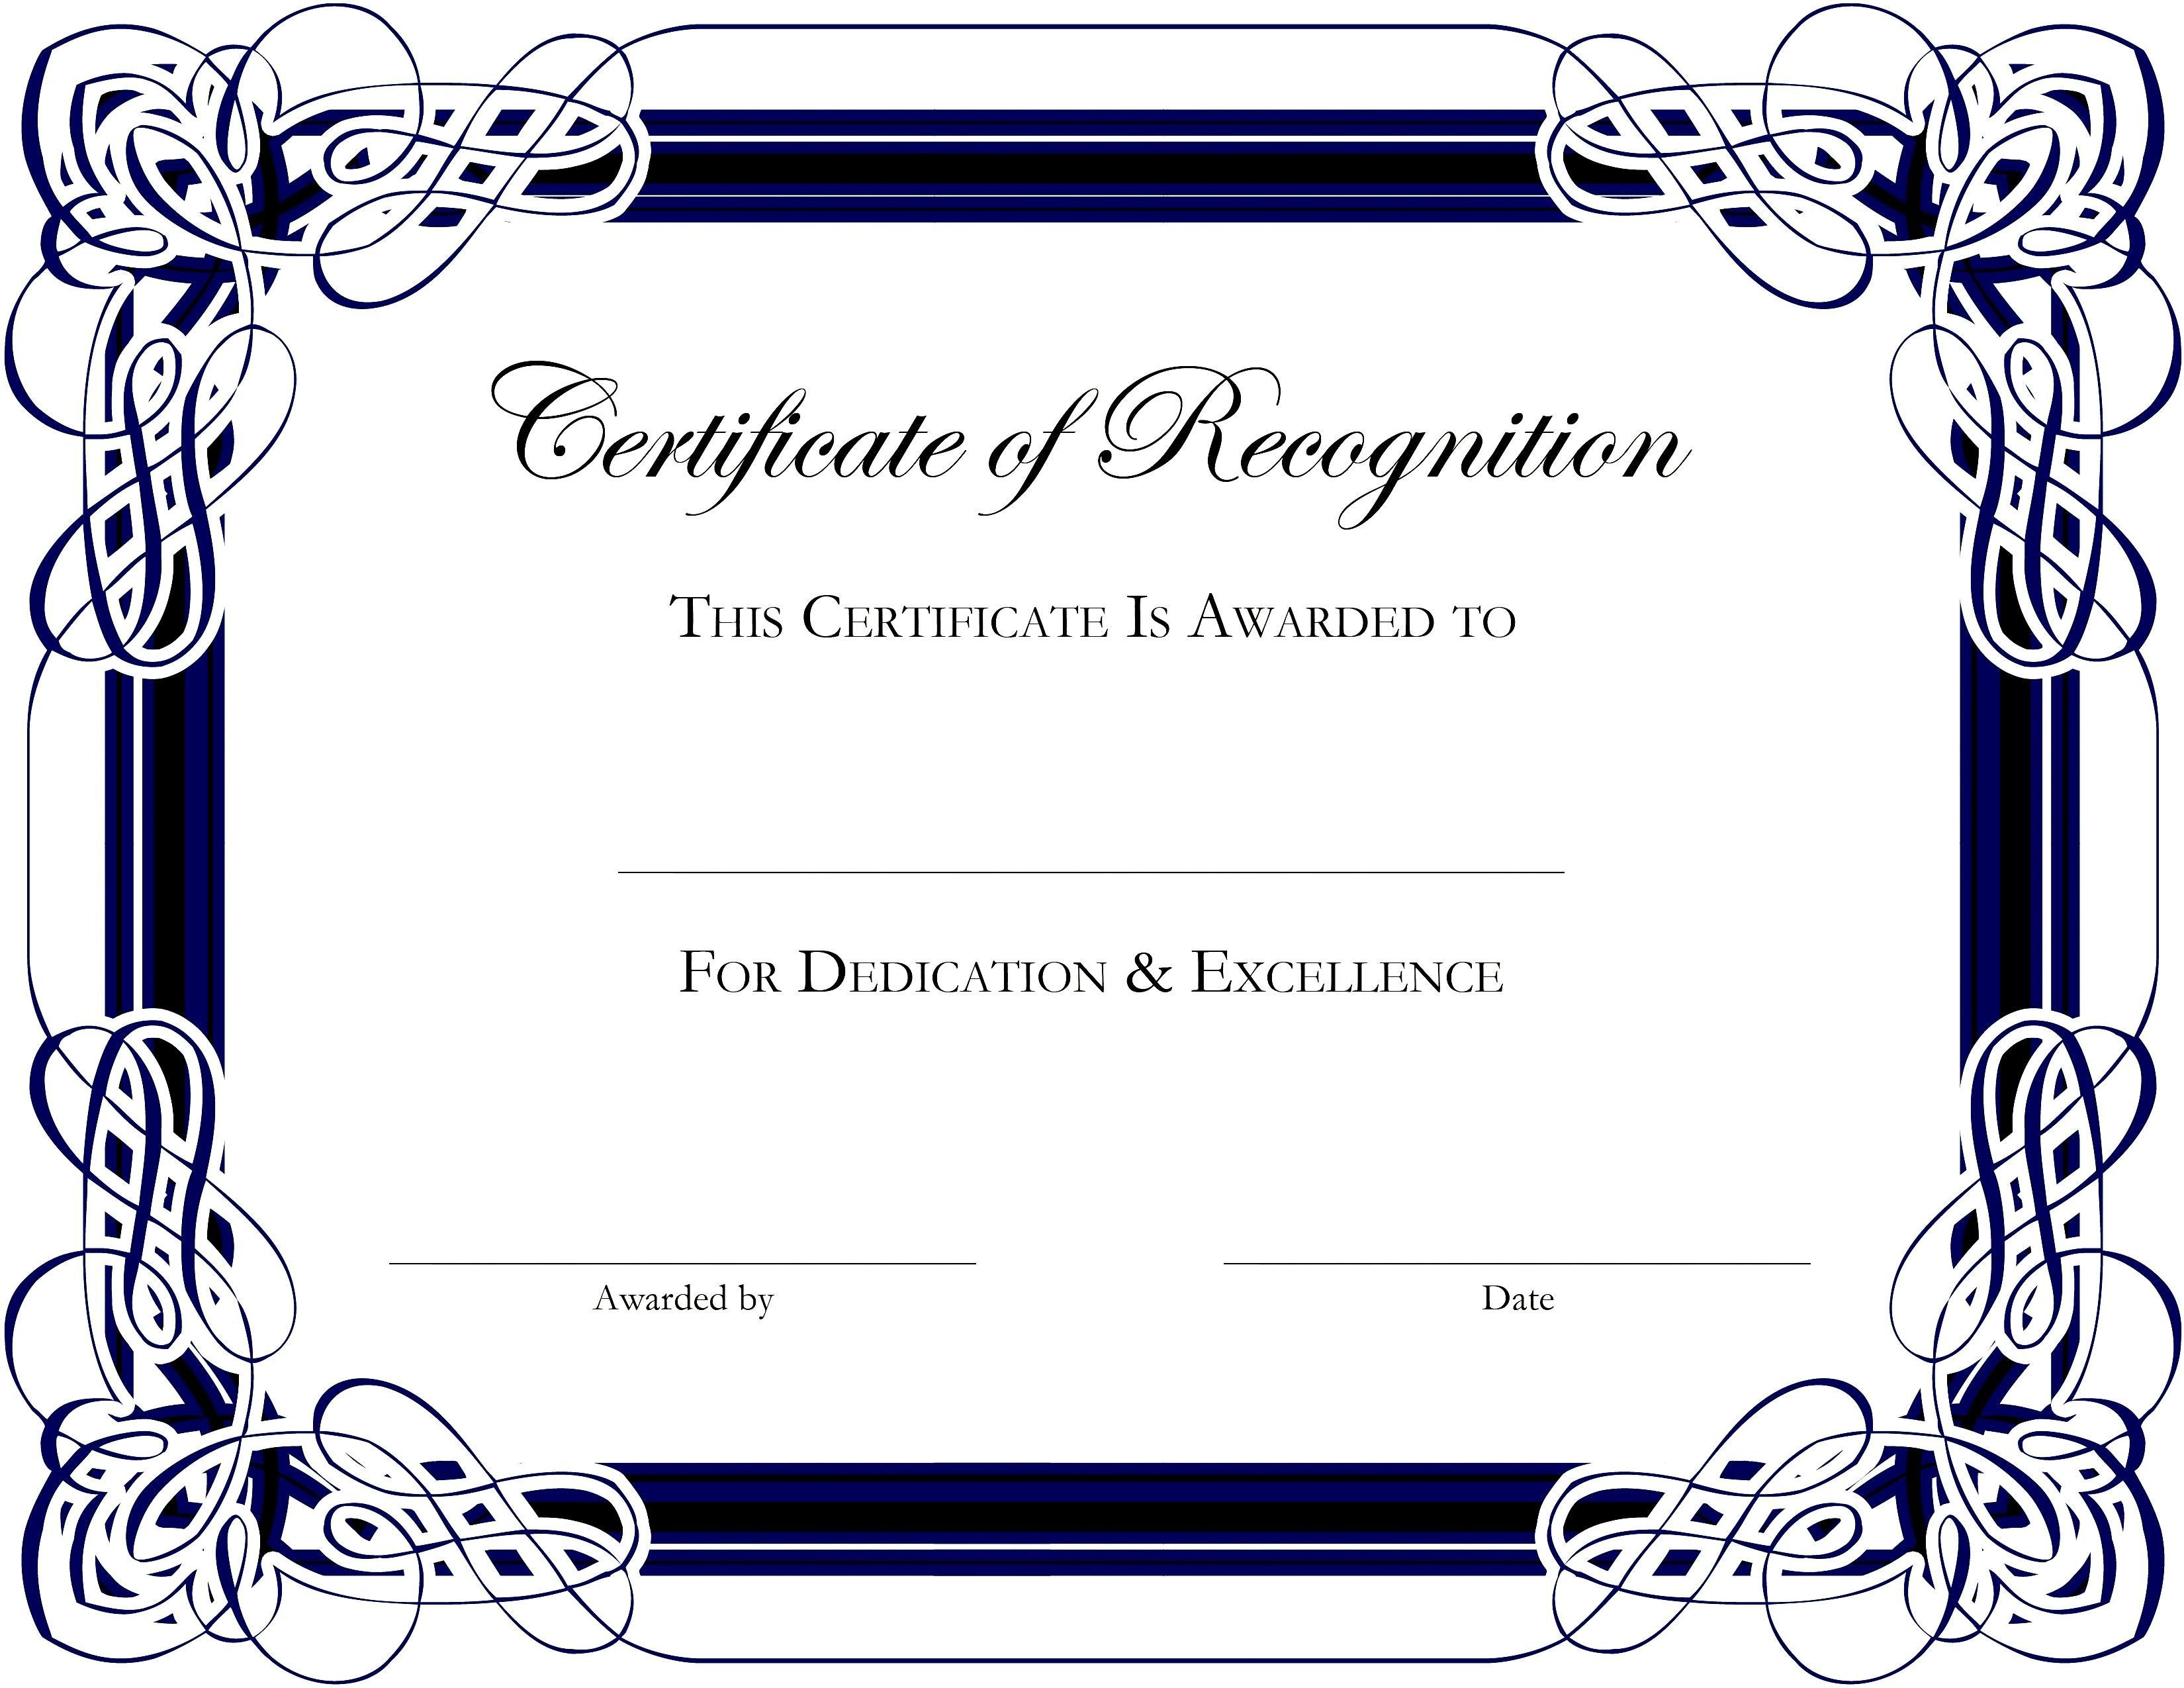 Award Templates For Microsoft Publisher  Besttemplate with regard to Award Certificate Design Template